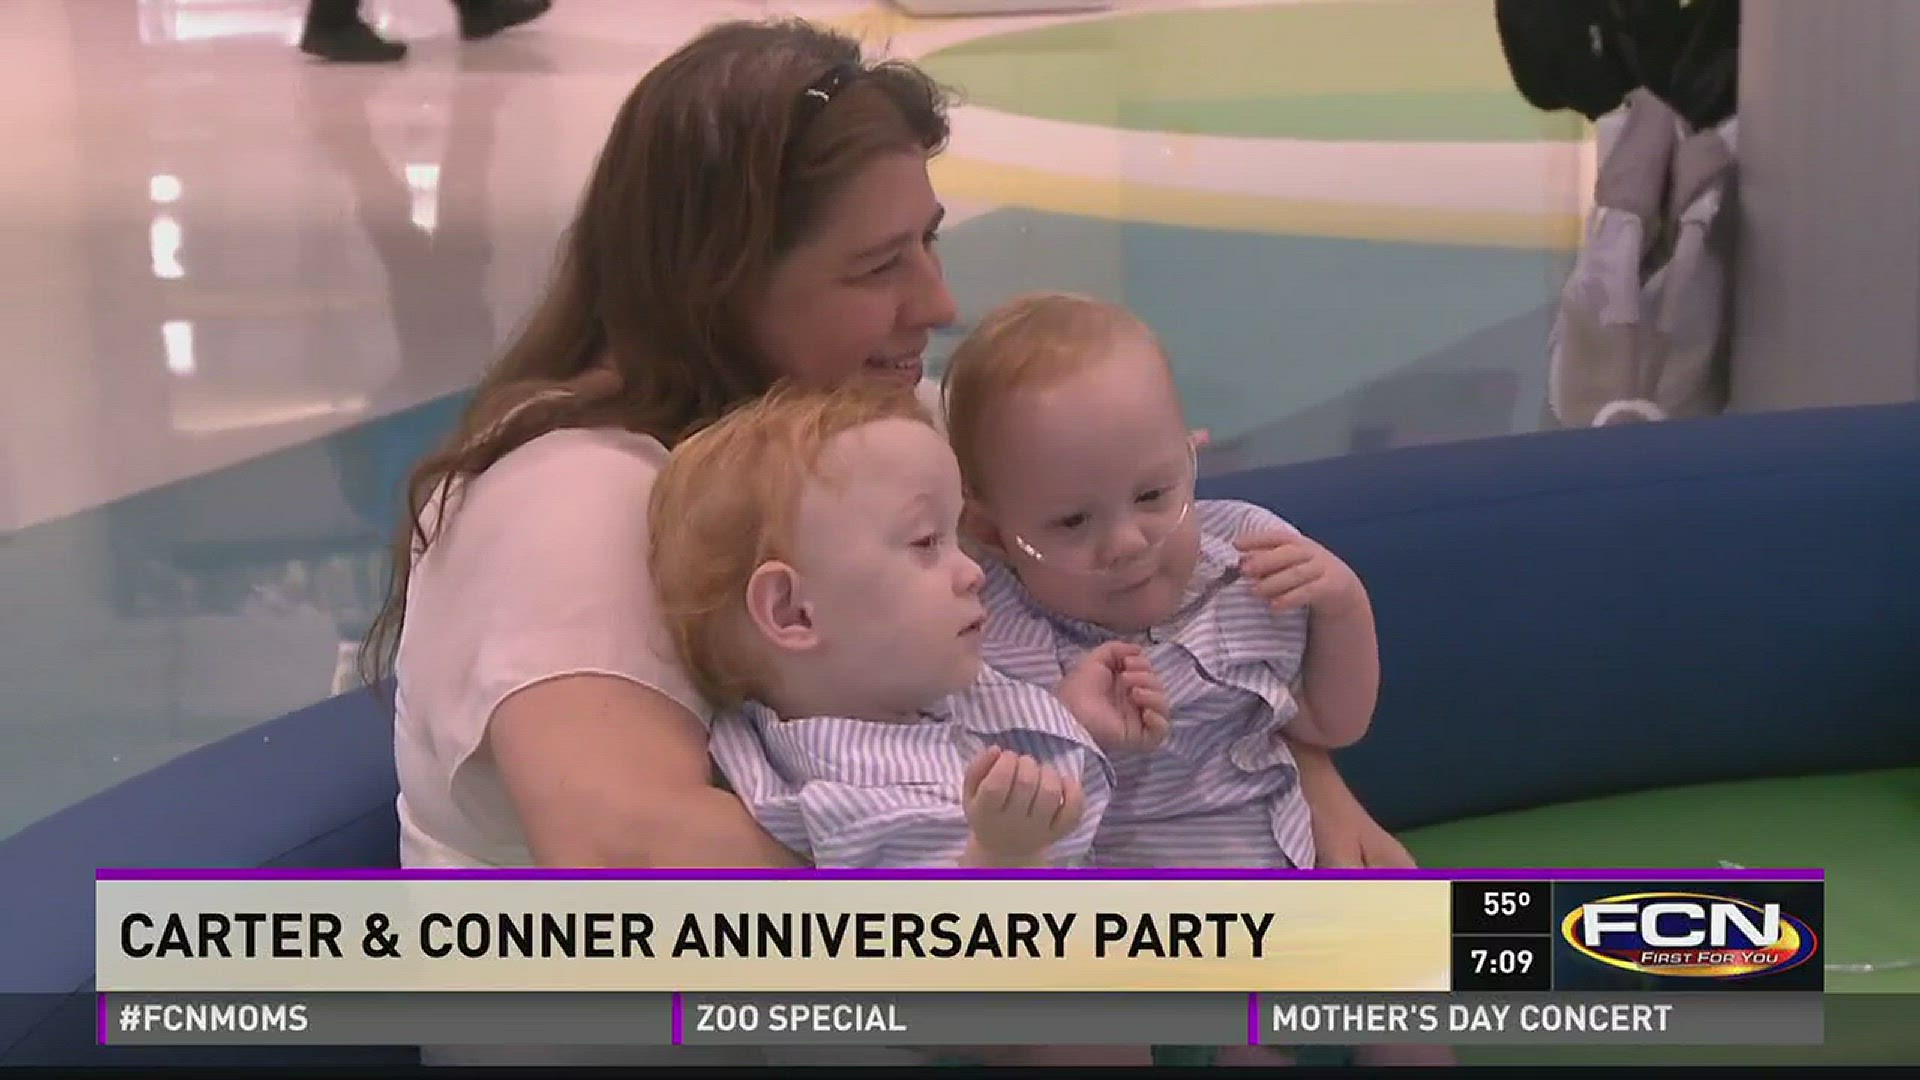 Carter & Conner anniversary party